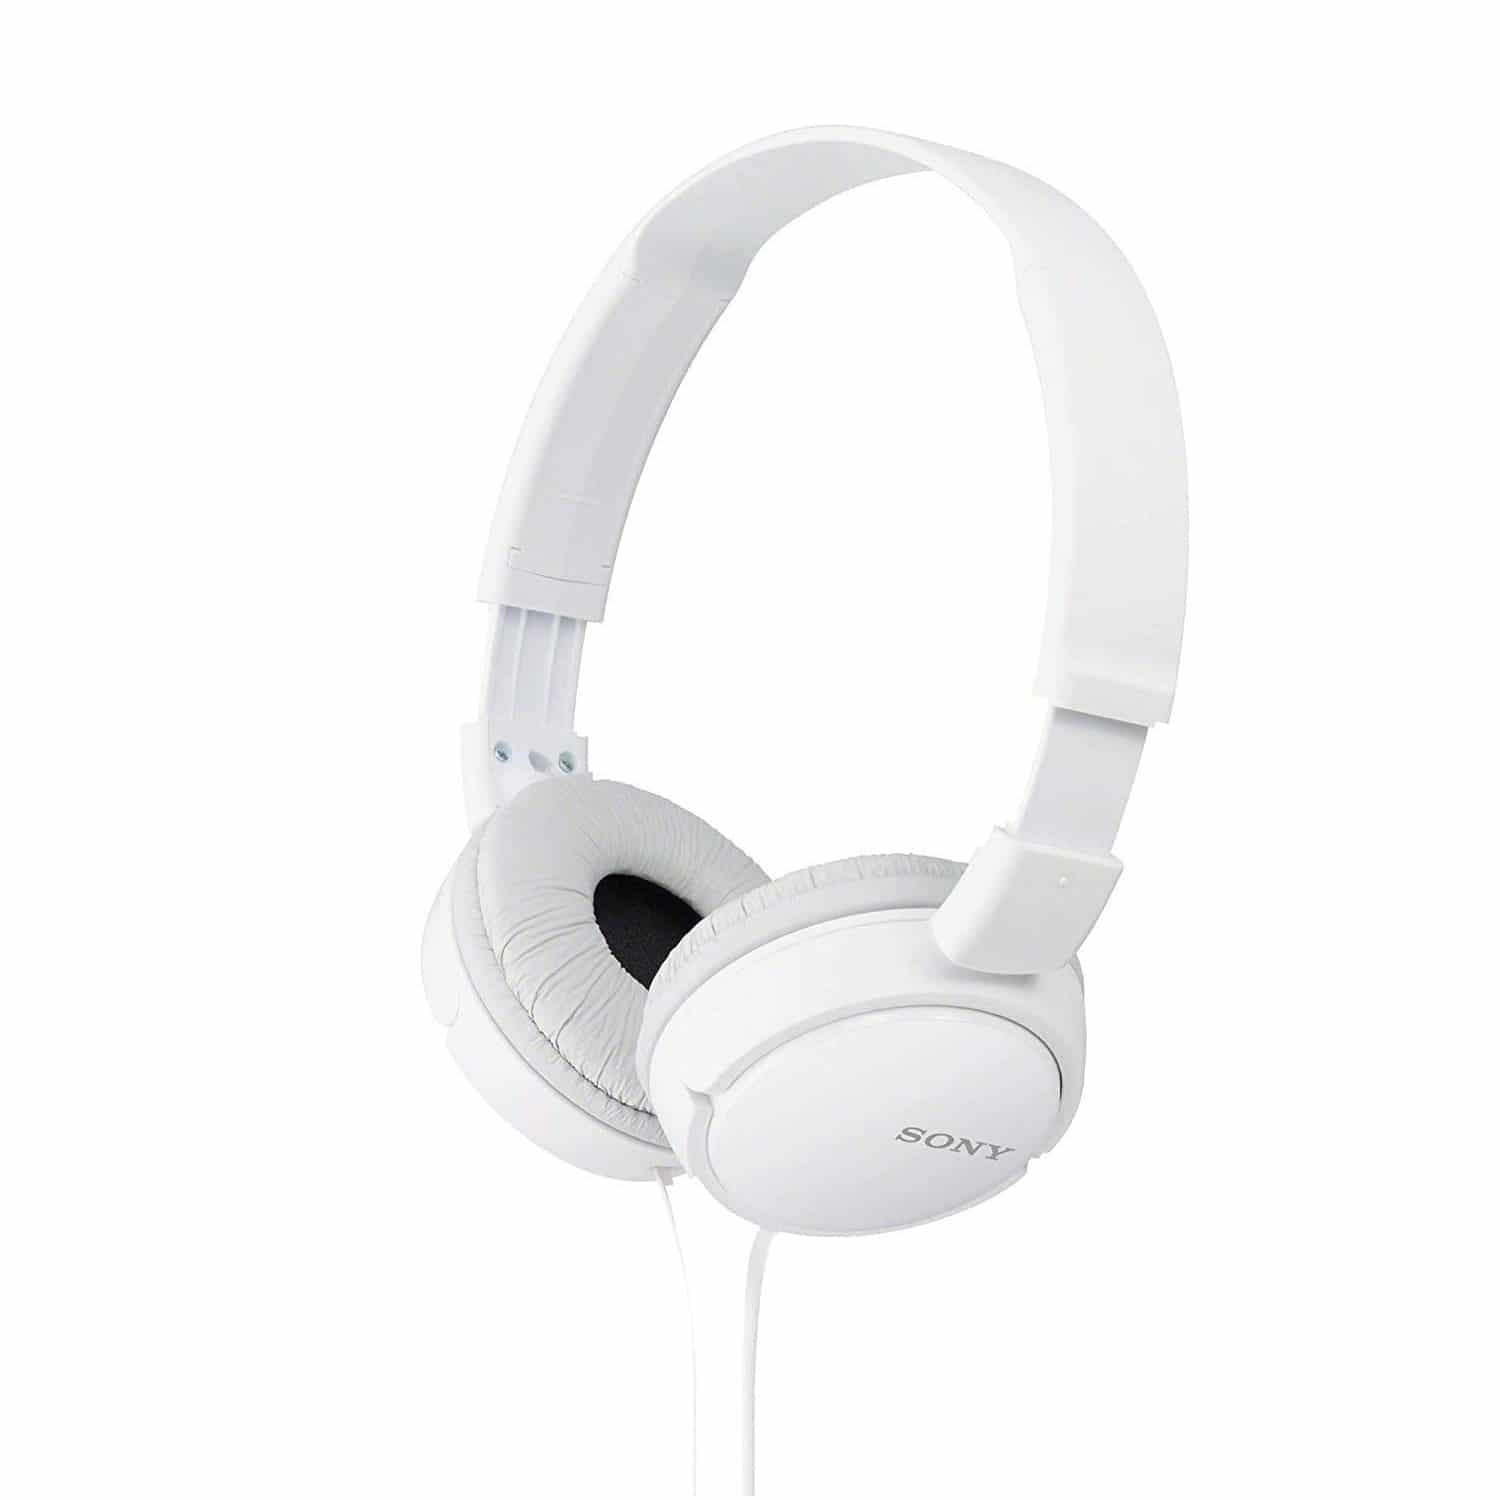 Sony MDRZX110 ZX Series Extra Bass Stereo Headset – White Audio  |  Headsets  |  Wired Headsets  |